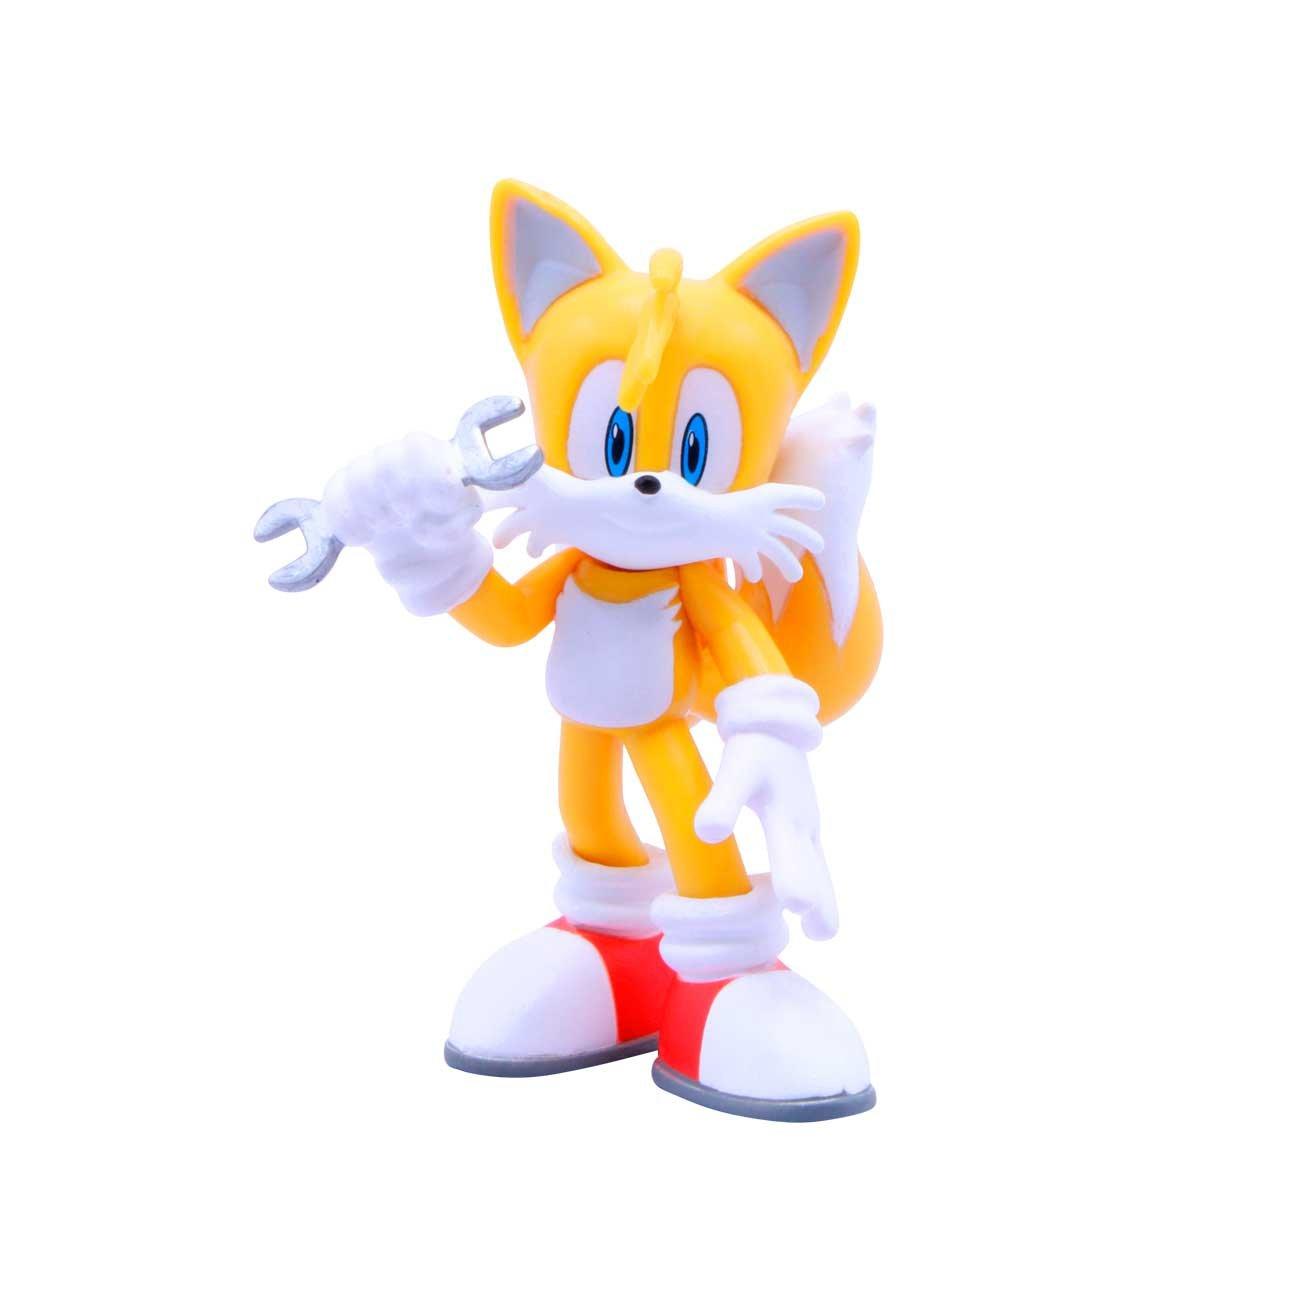 Tails Sonic Action Figure, Sonic Knuckles Figure